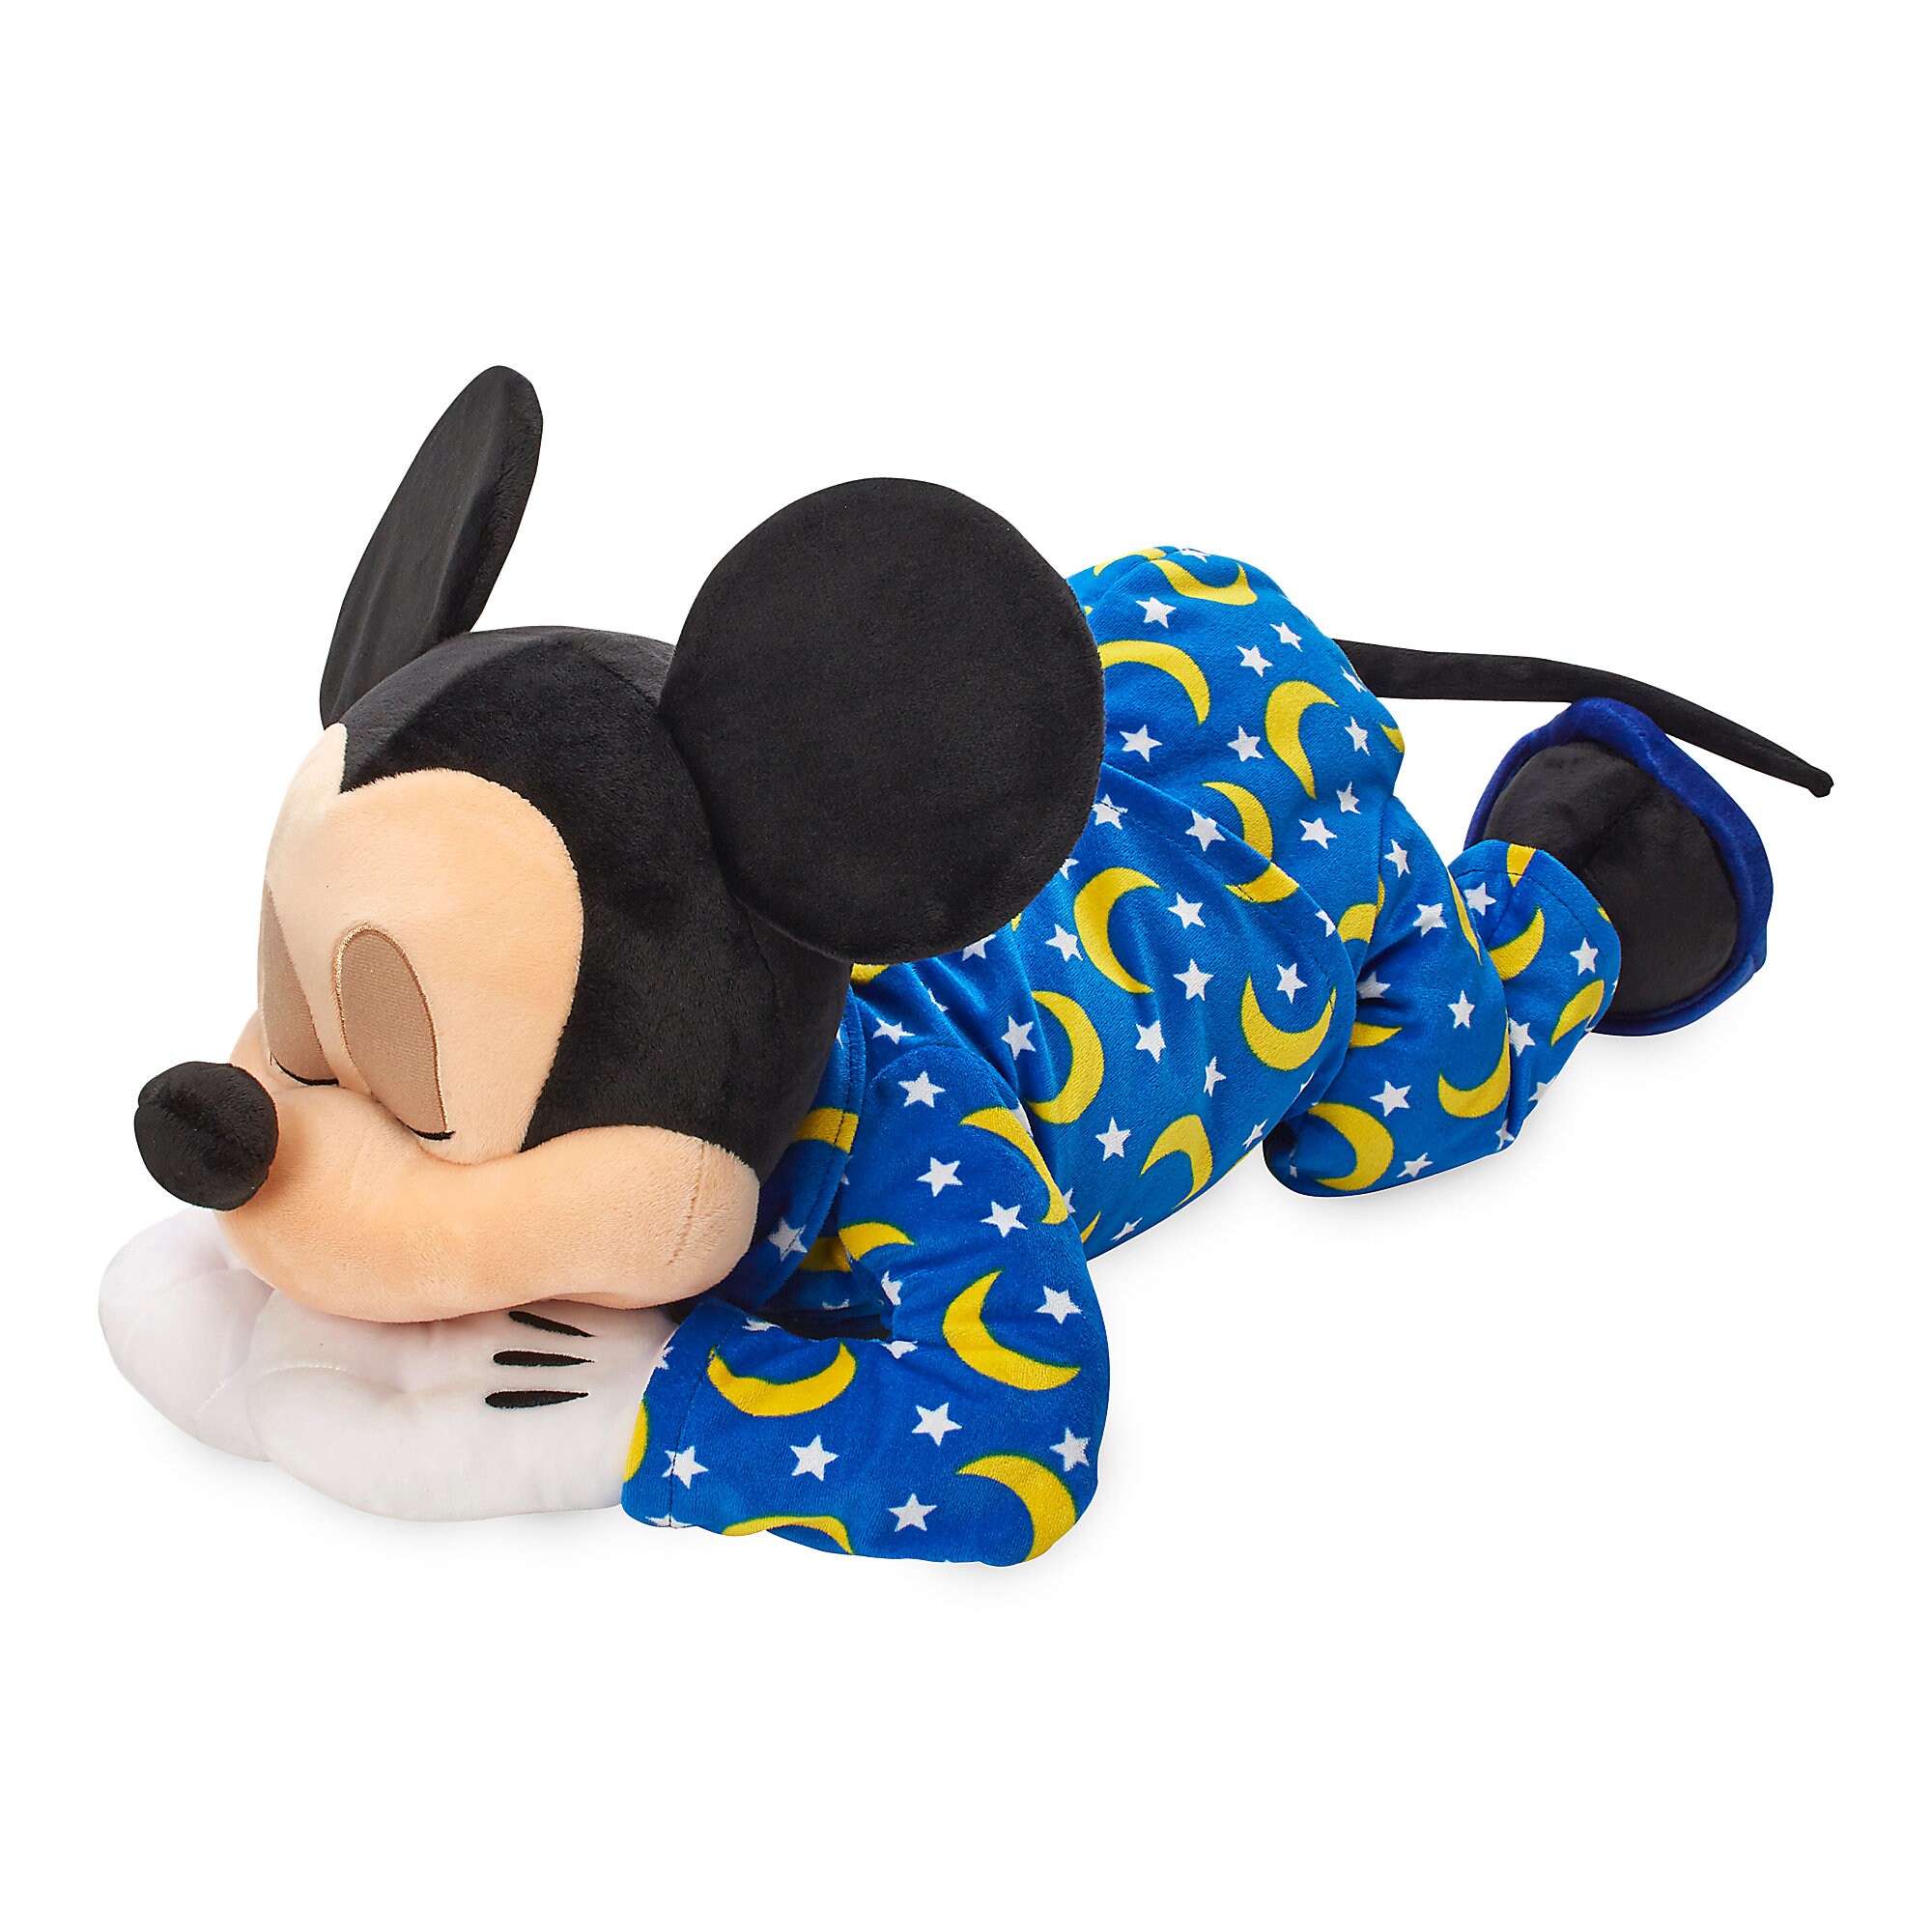 Mickey Mouse Dream Friend Plush - Large